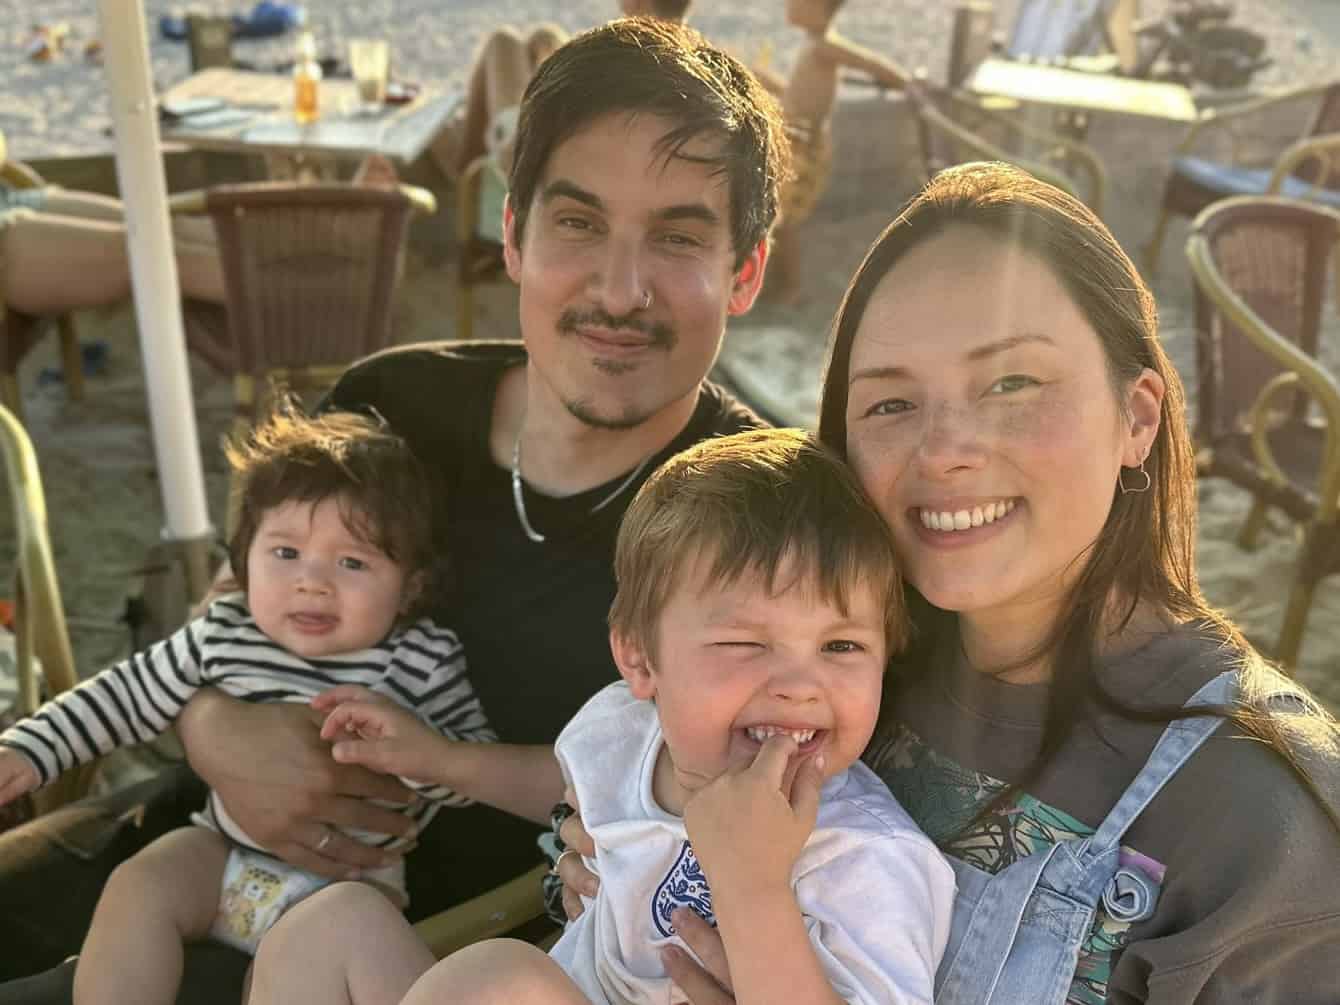 Family photo of Xandra, her partner Jay and their 2 little kids at the beach